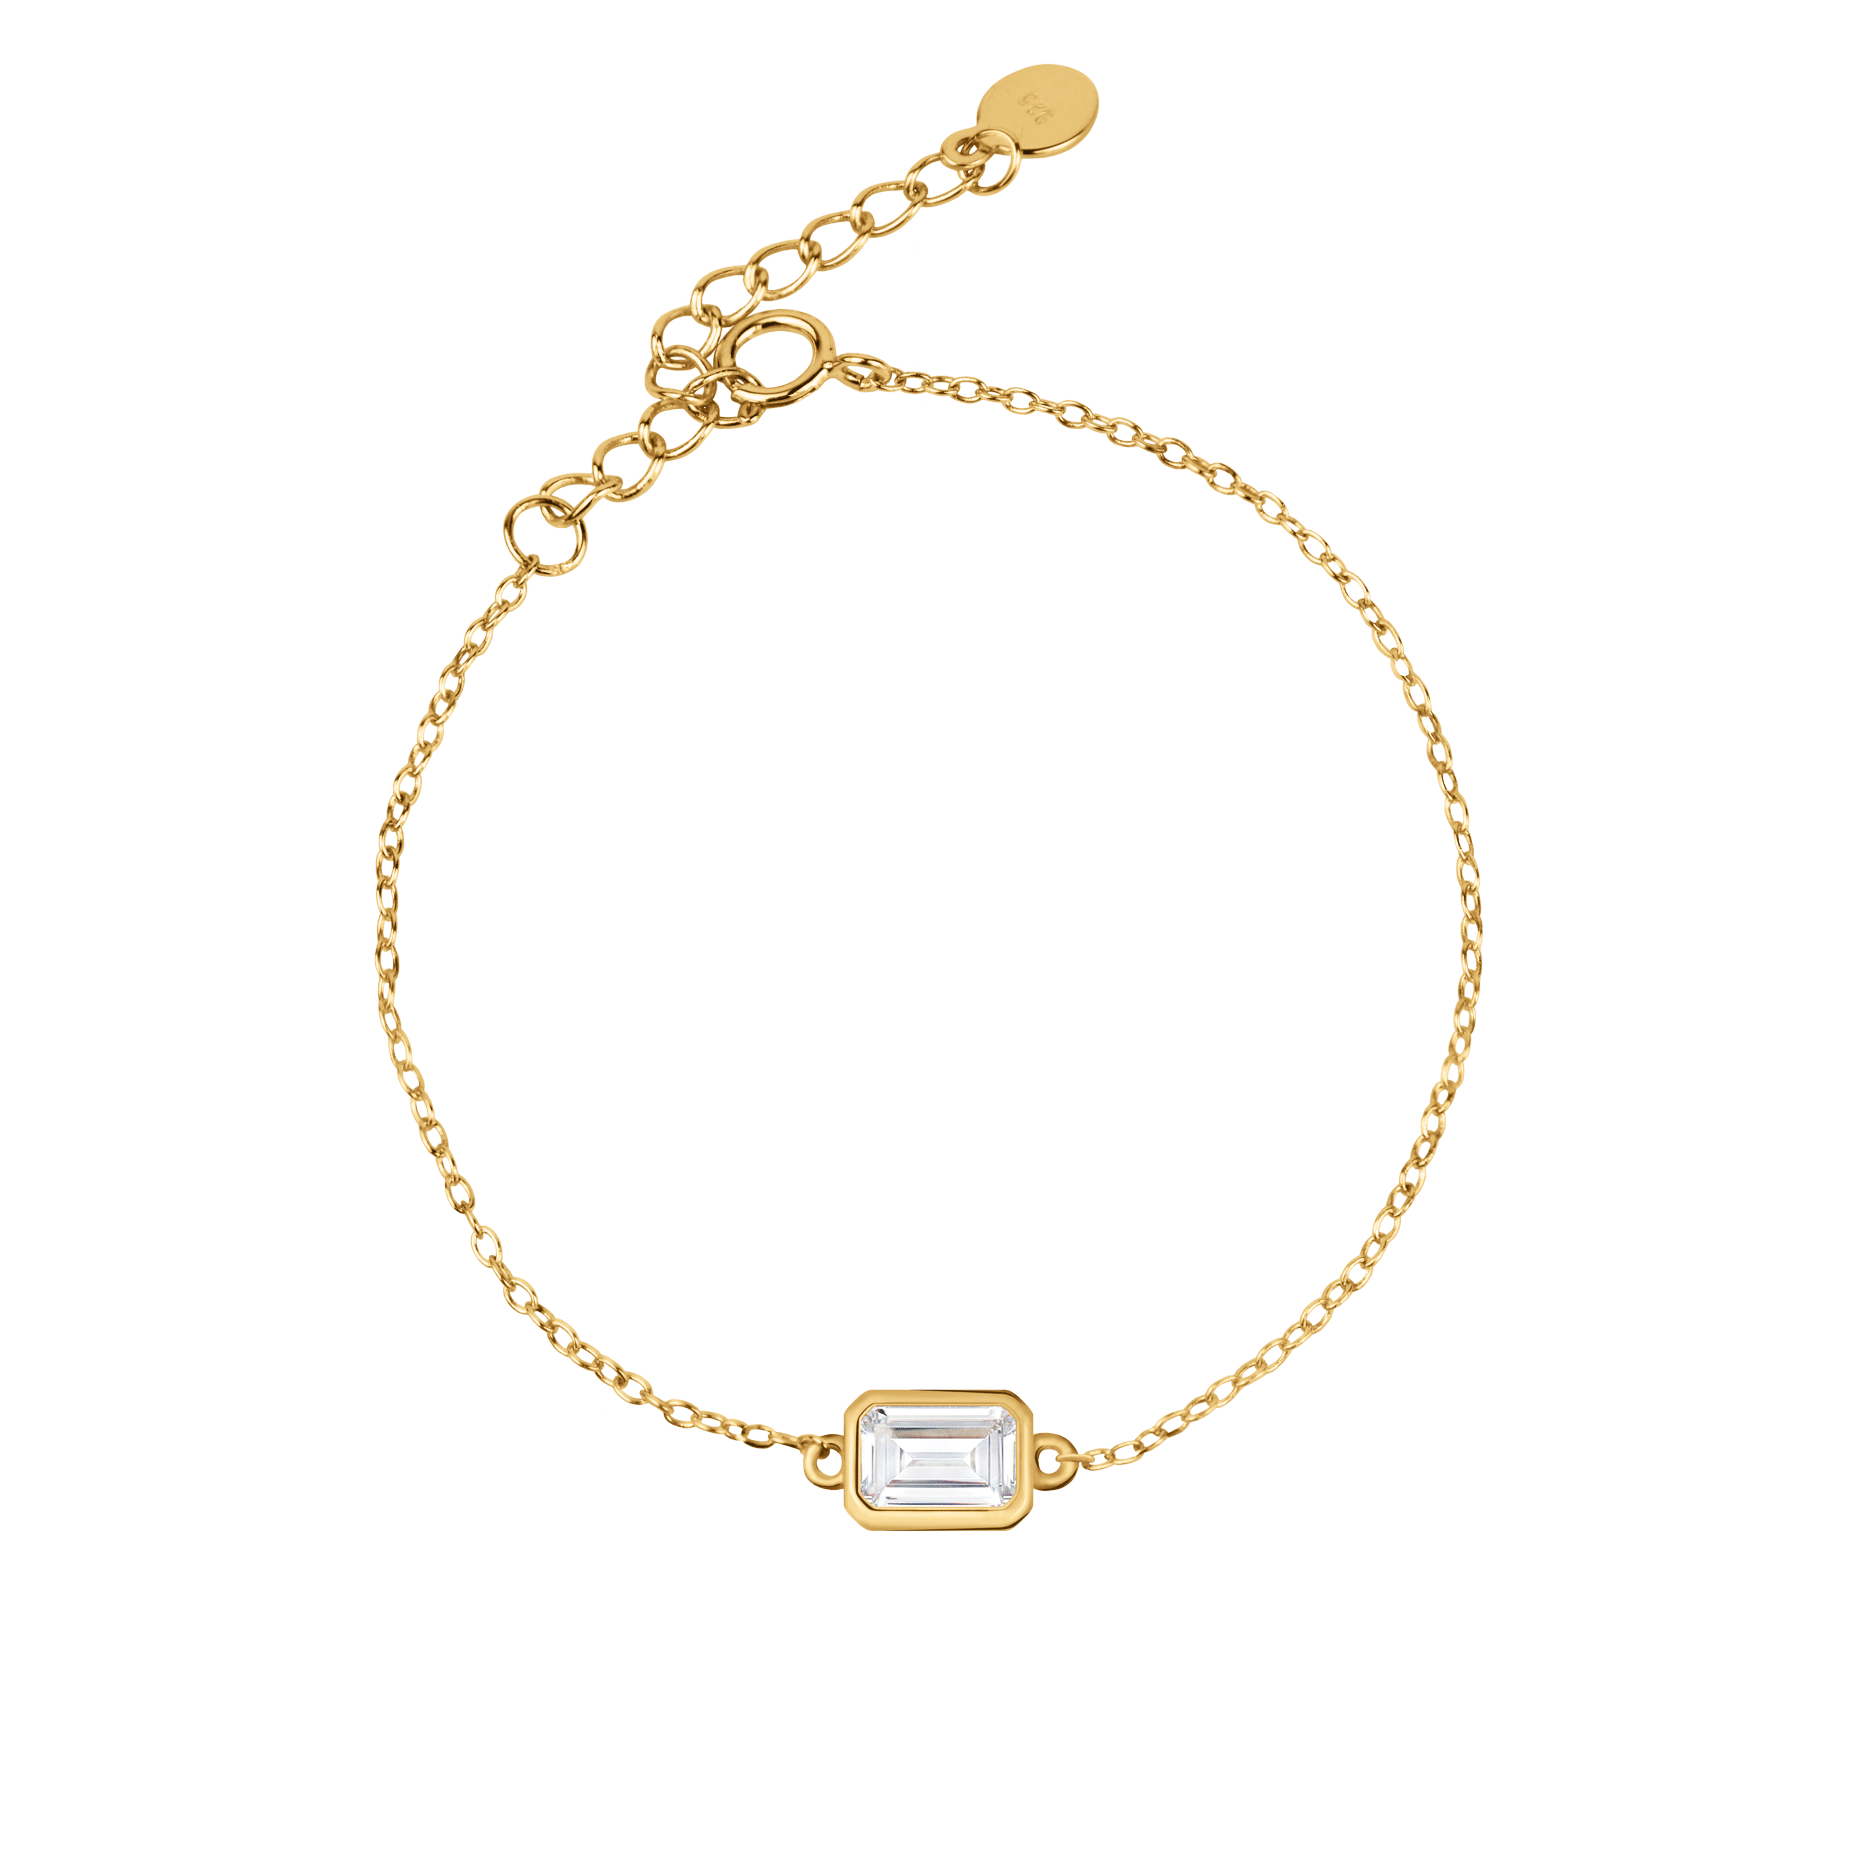 Tender Objects New Light Chain Bracelet - Modern sophistication in a chic design. Elevate your style with this captivating and stylish bracelet.